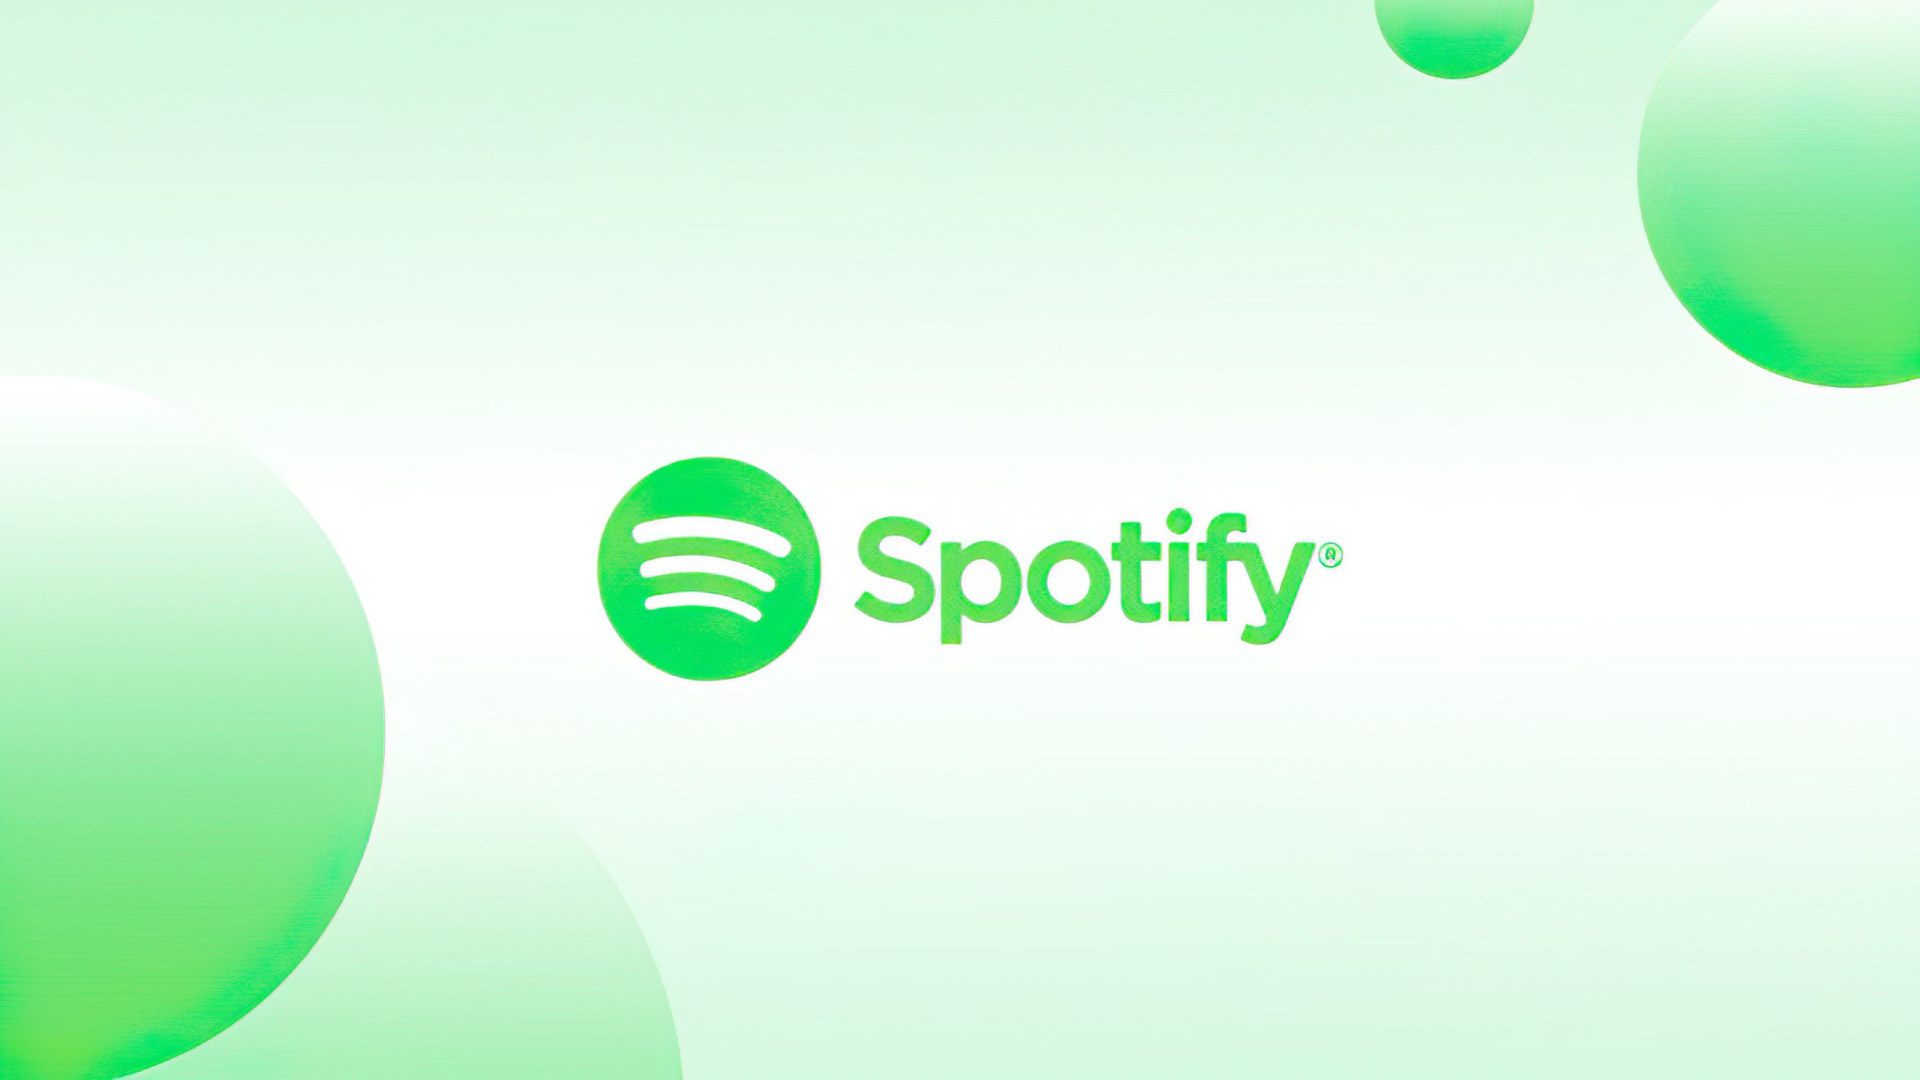 Spotify: A platform that democratizes live audio streams, Digital copyright restricted recorded music. 1920x1080 Full HD Background.